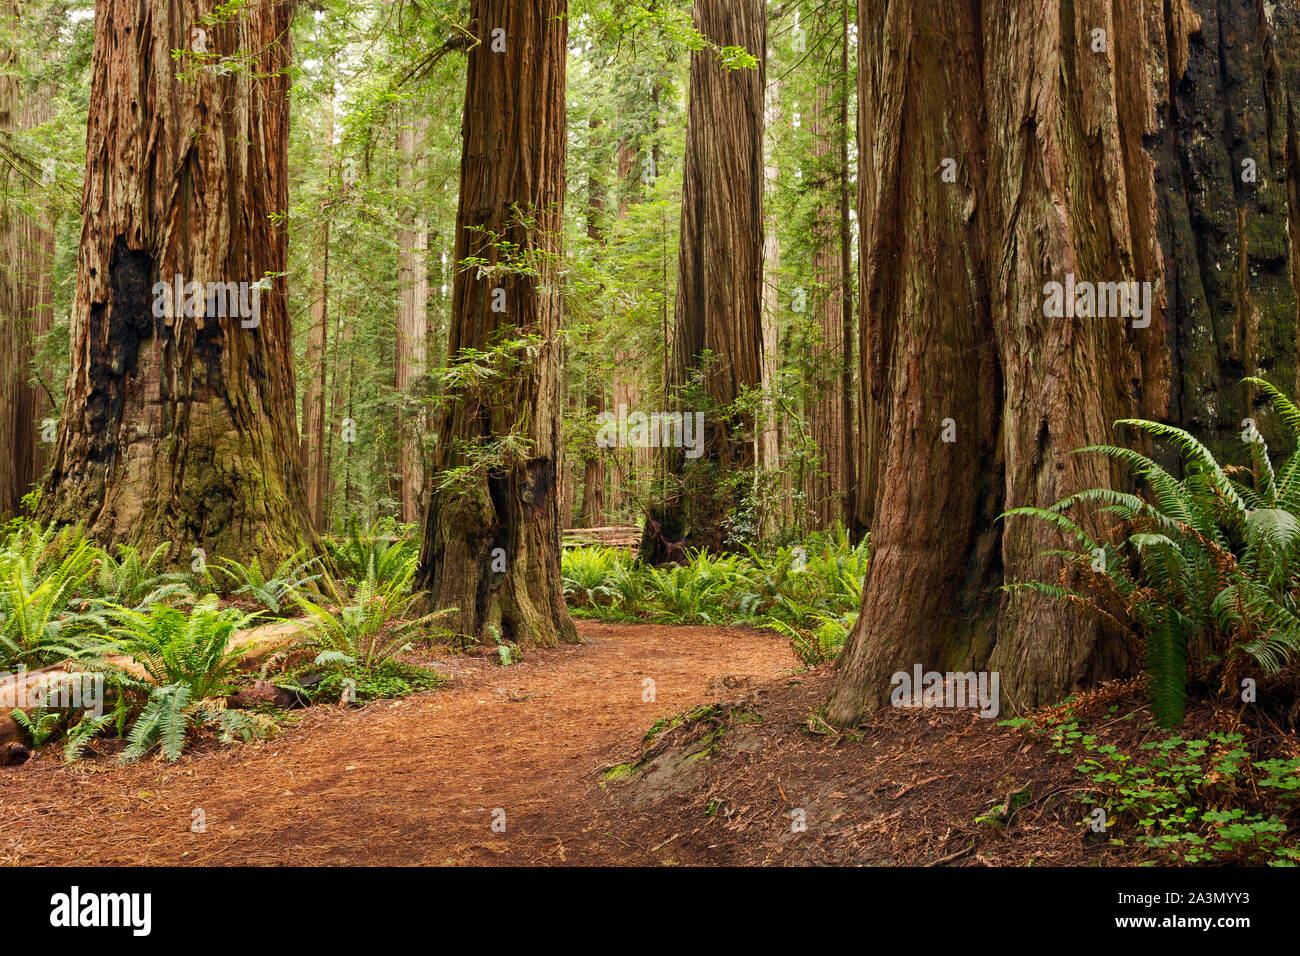 CA03636-00...CALIFORNIA - Loop trail through the redwood trees through Stout Grove in the Jedediah Smith Redwoods State Park. Stock Photo